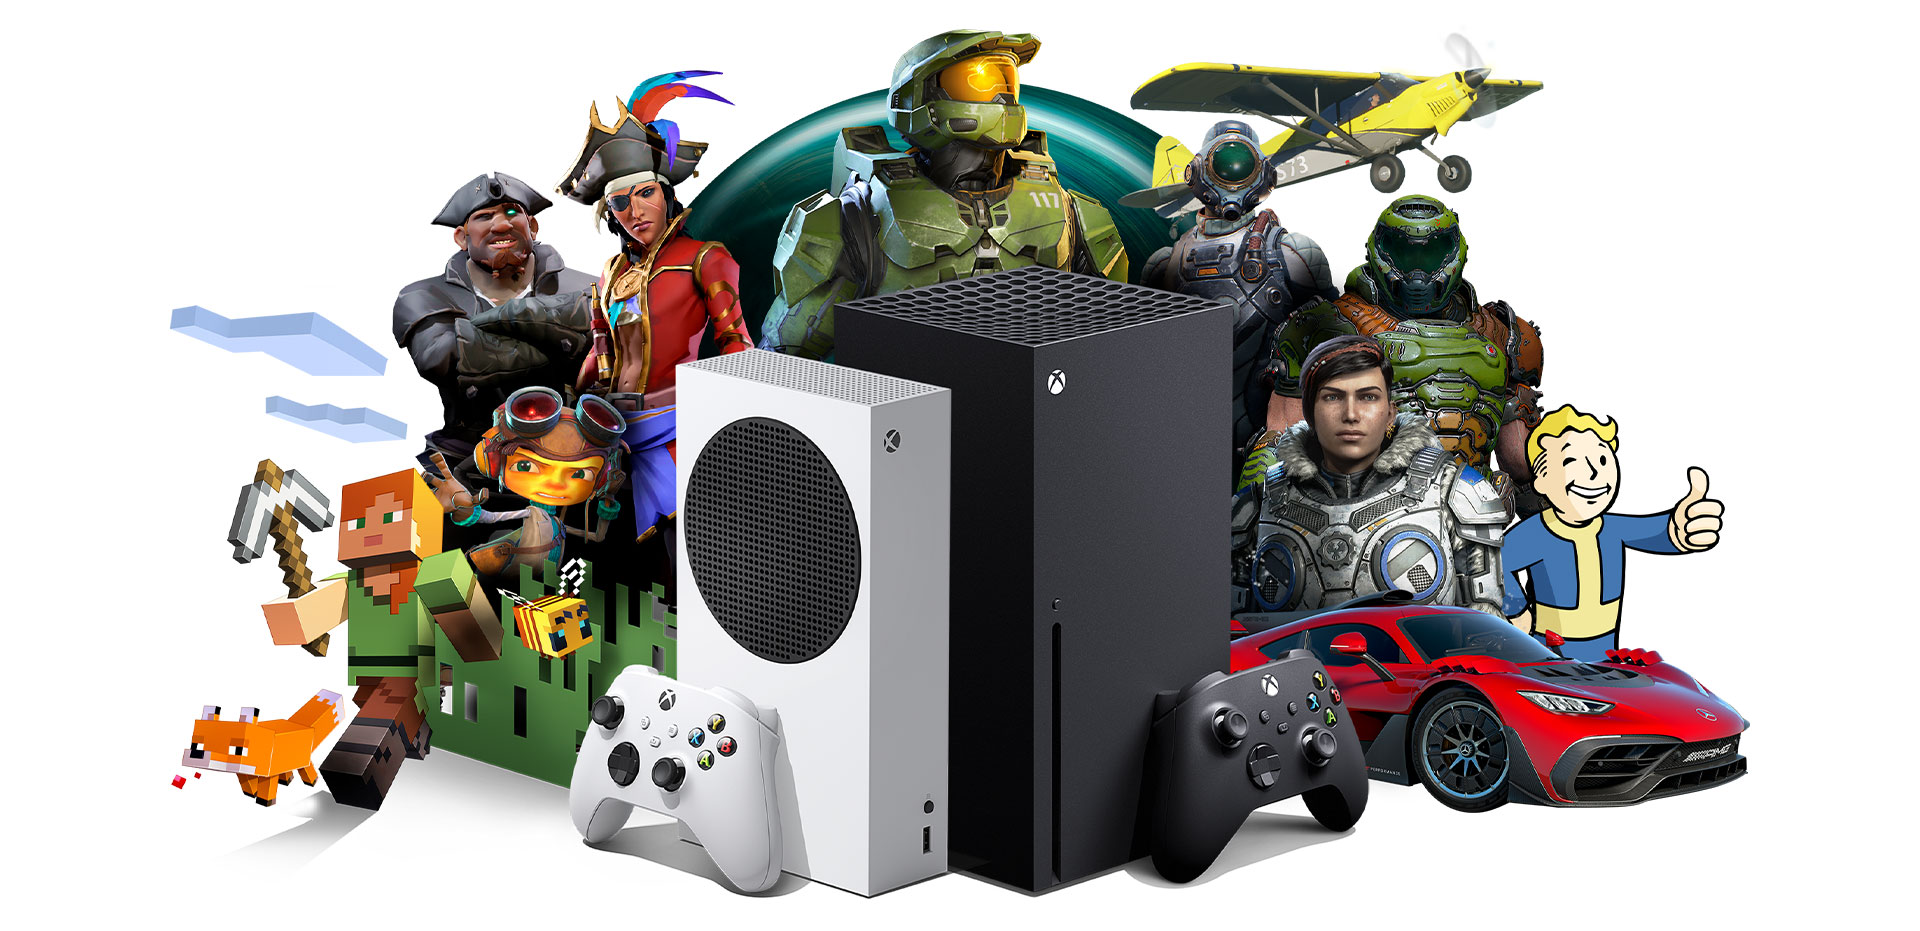 Xbox is also skipping E3 this year.  None of the big three console manufacturers will be present.